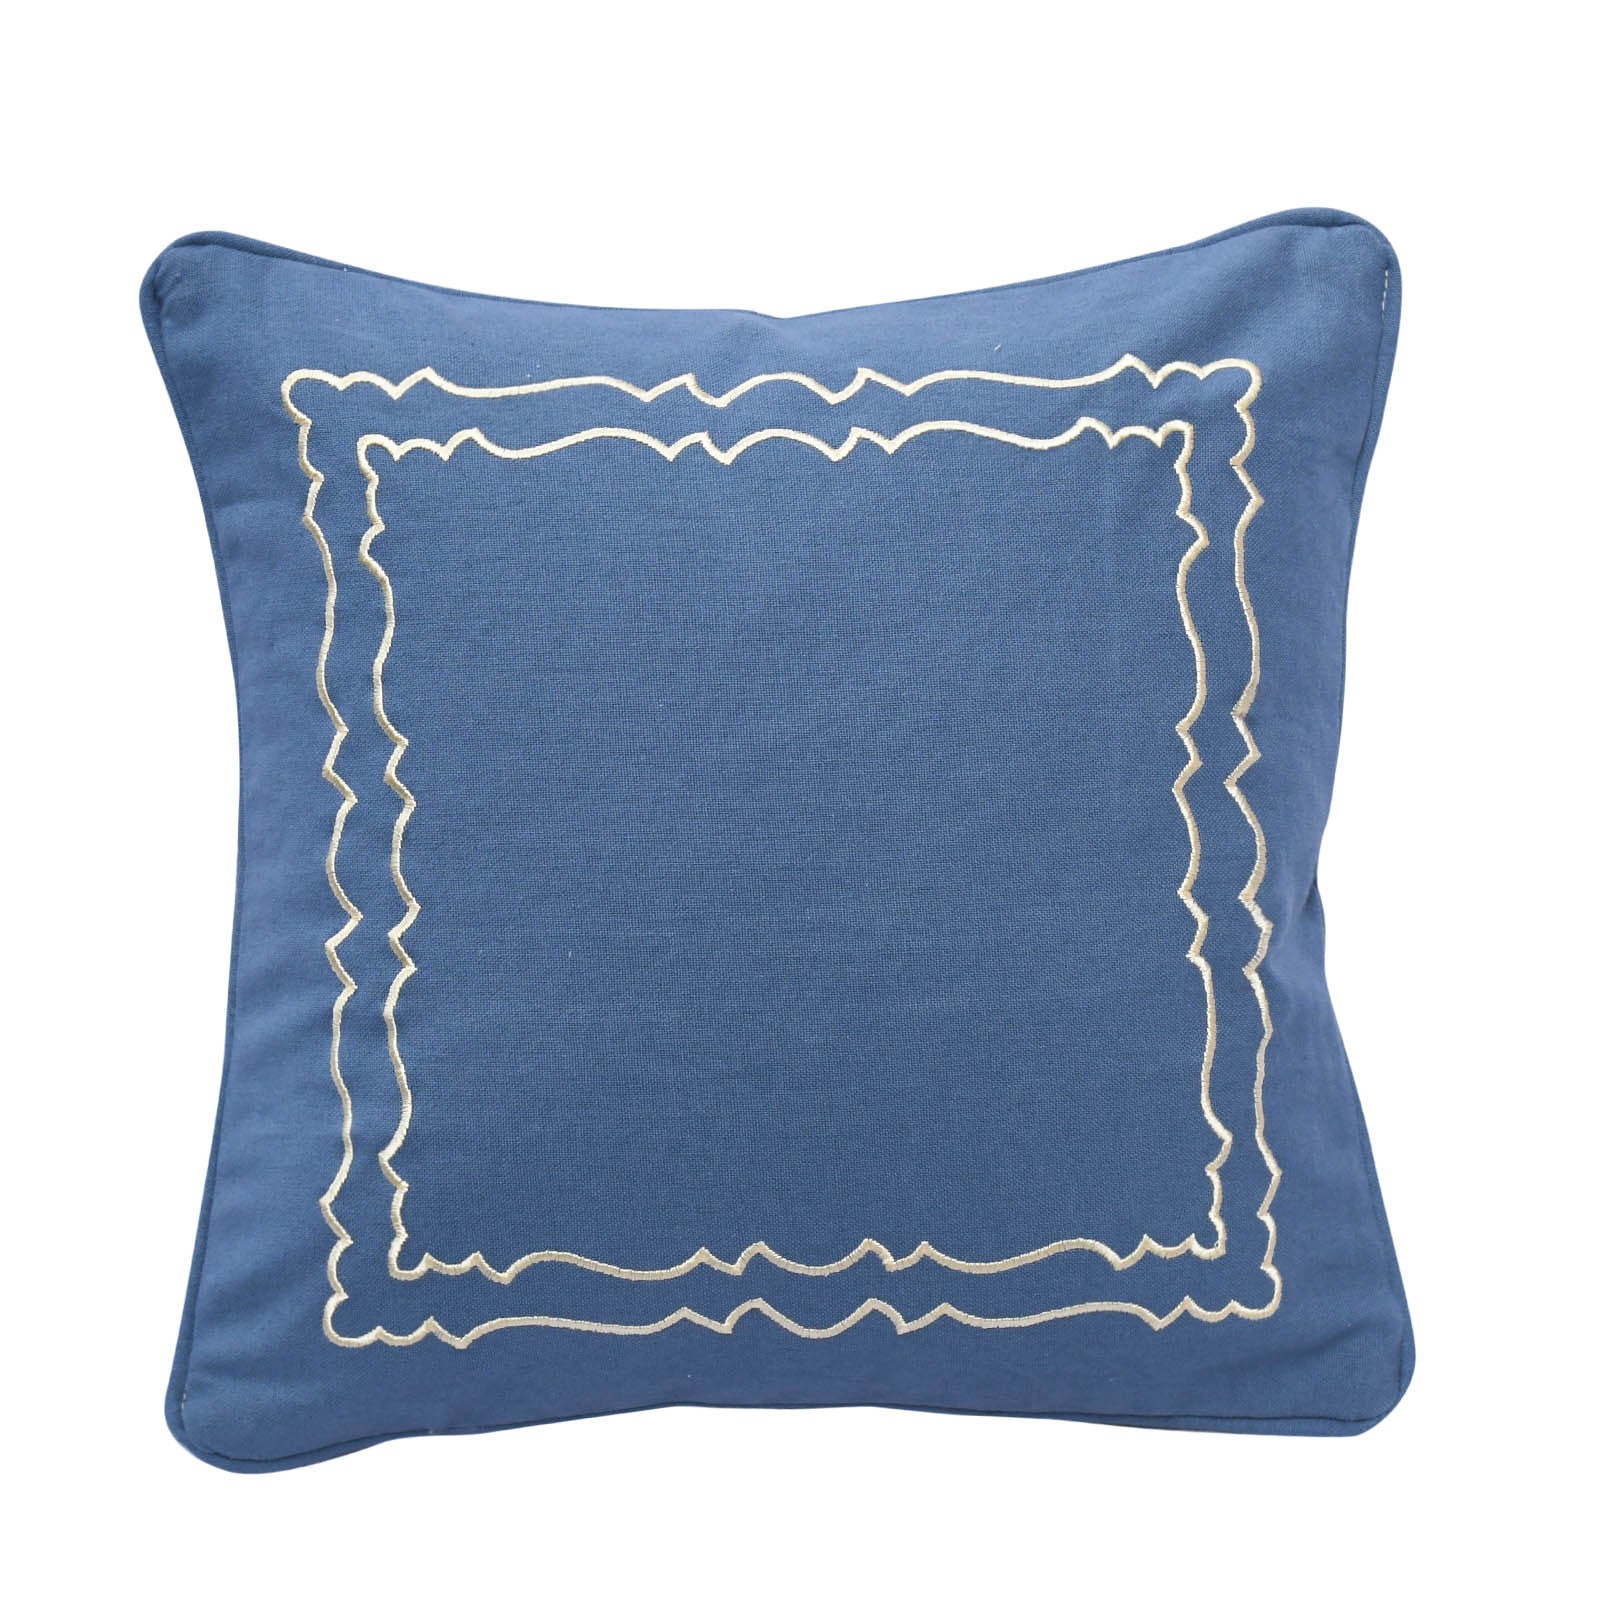 Scalloped Cushion Cover - Blue